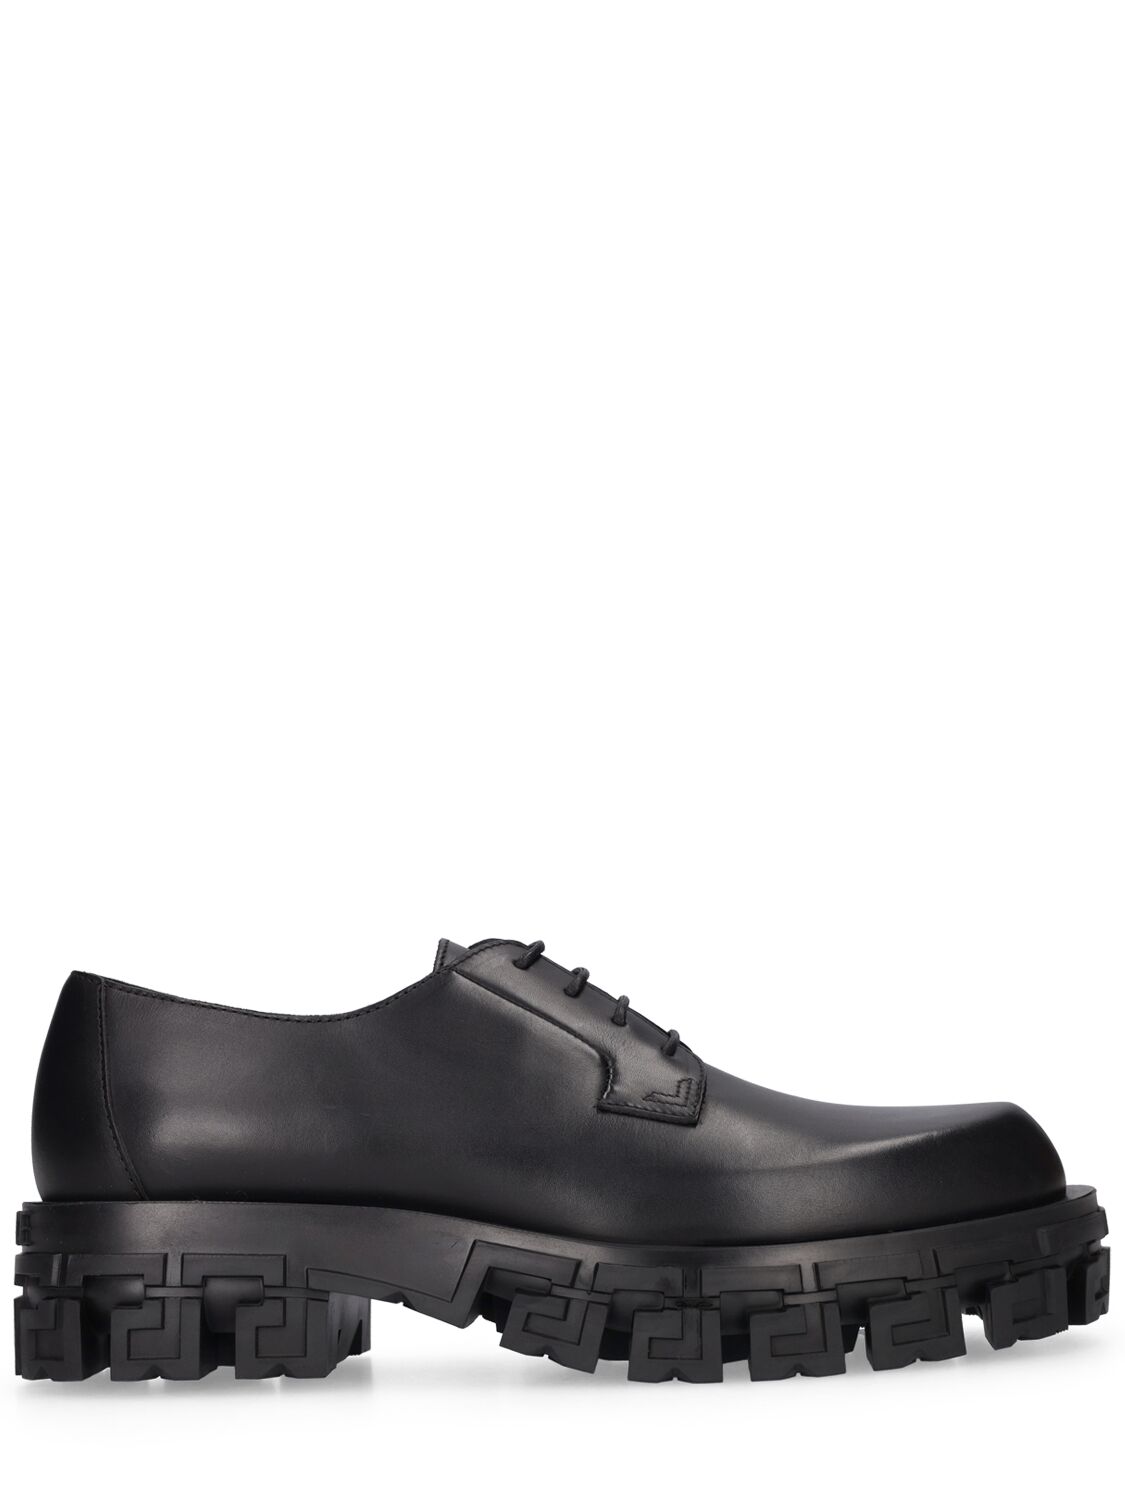 VERSACE LEATHER LACE-UP SHOES